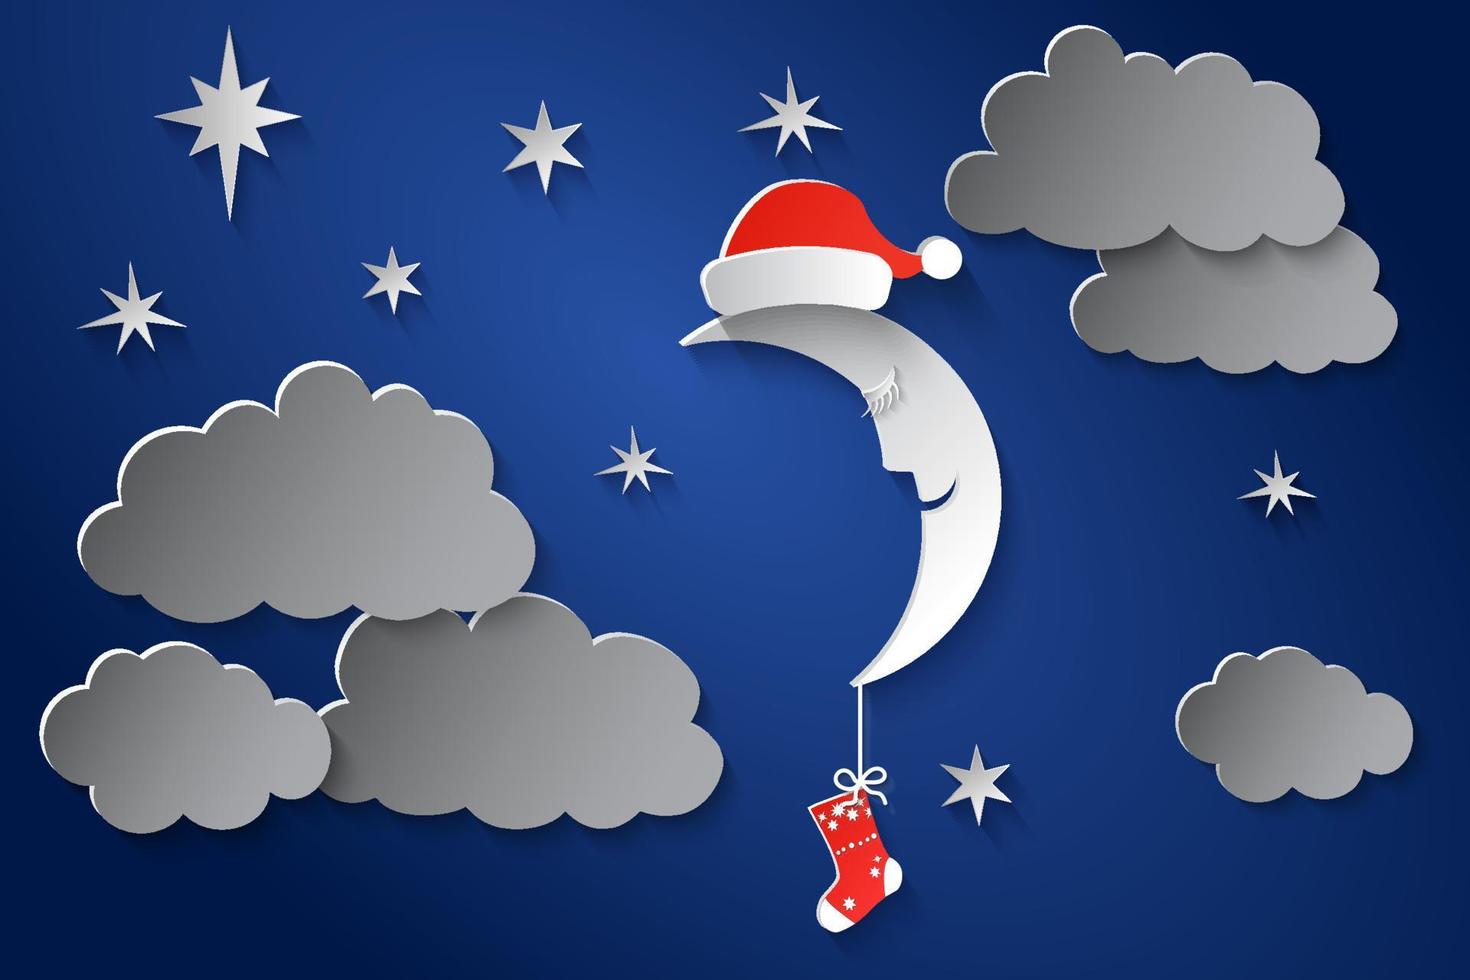 The moon in cap of Santa Claus and with a sock in the night starry sky. Paper art style. EPS10 vector